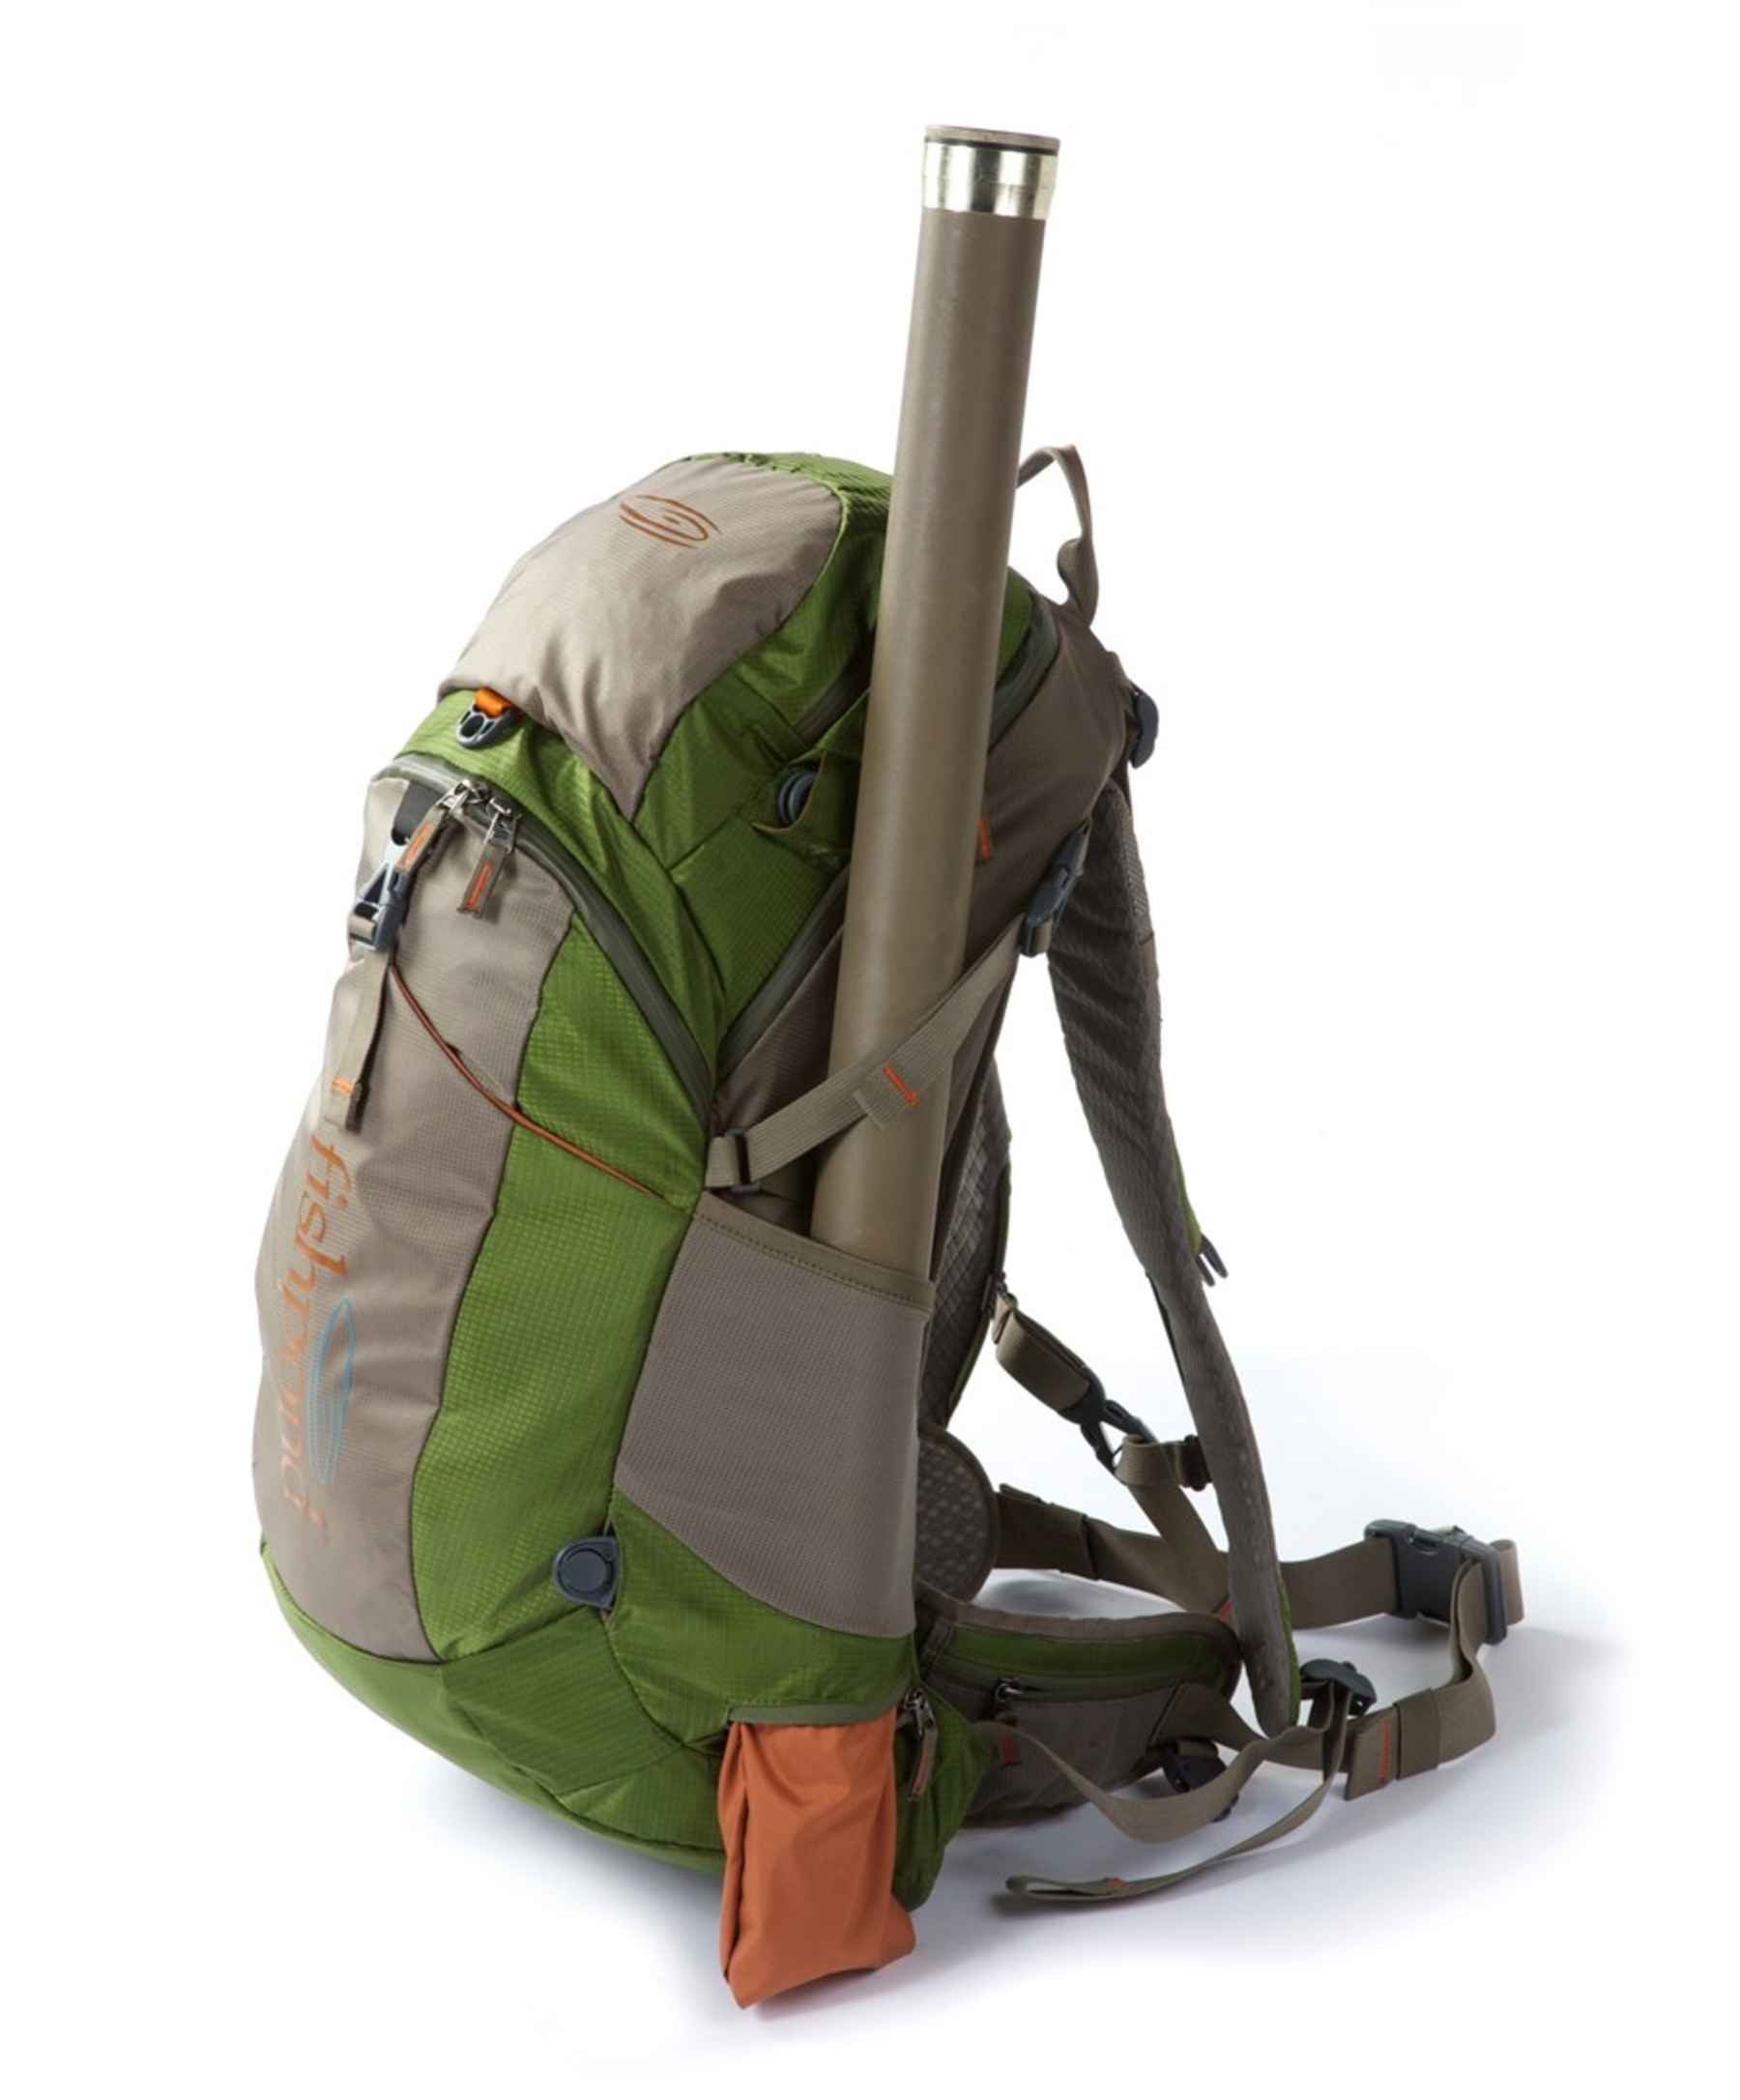 Fishpond Black Canyon Backpack Review 